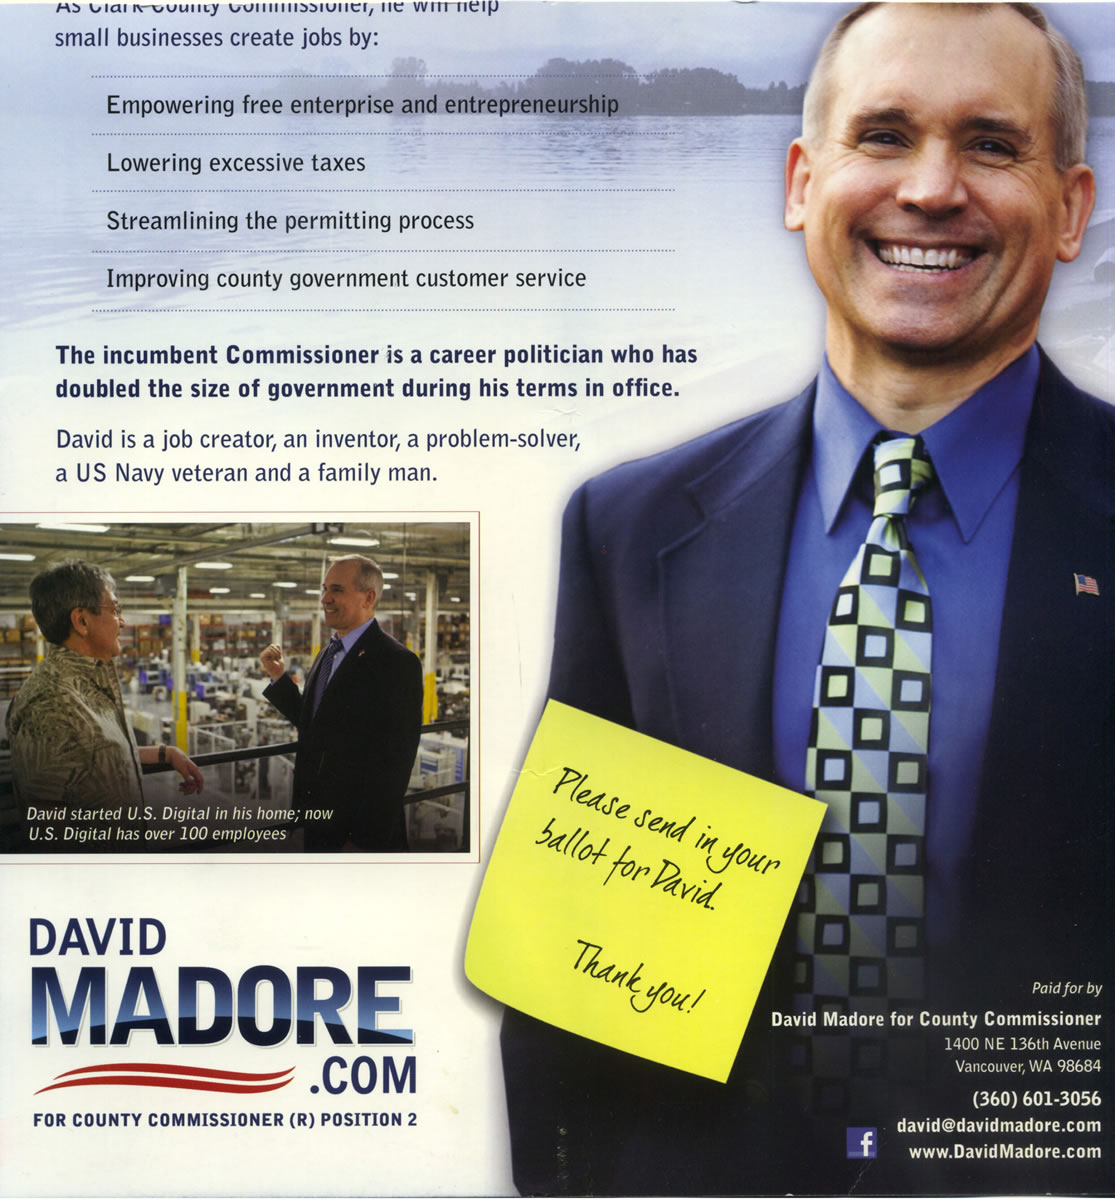 Candidate David Madore said he apologized to Clark County Commissioner Marc Boldt for including a false claim in a flier that Boldt has doubled the size of government. During Boldt's time in office, the county budget has decreased along with the number of county employees.